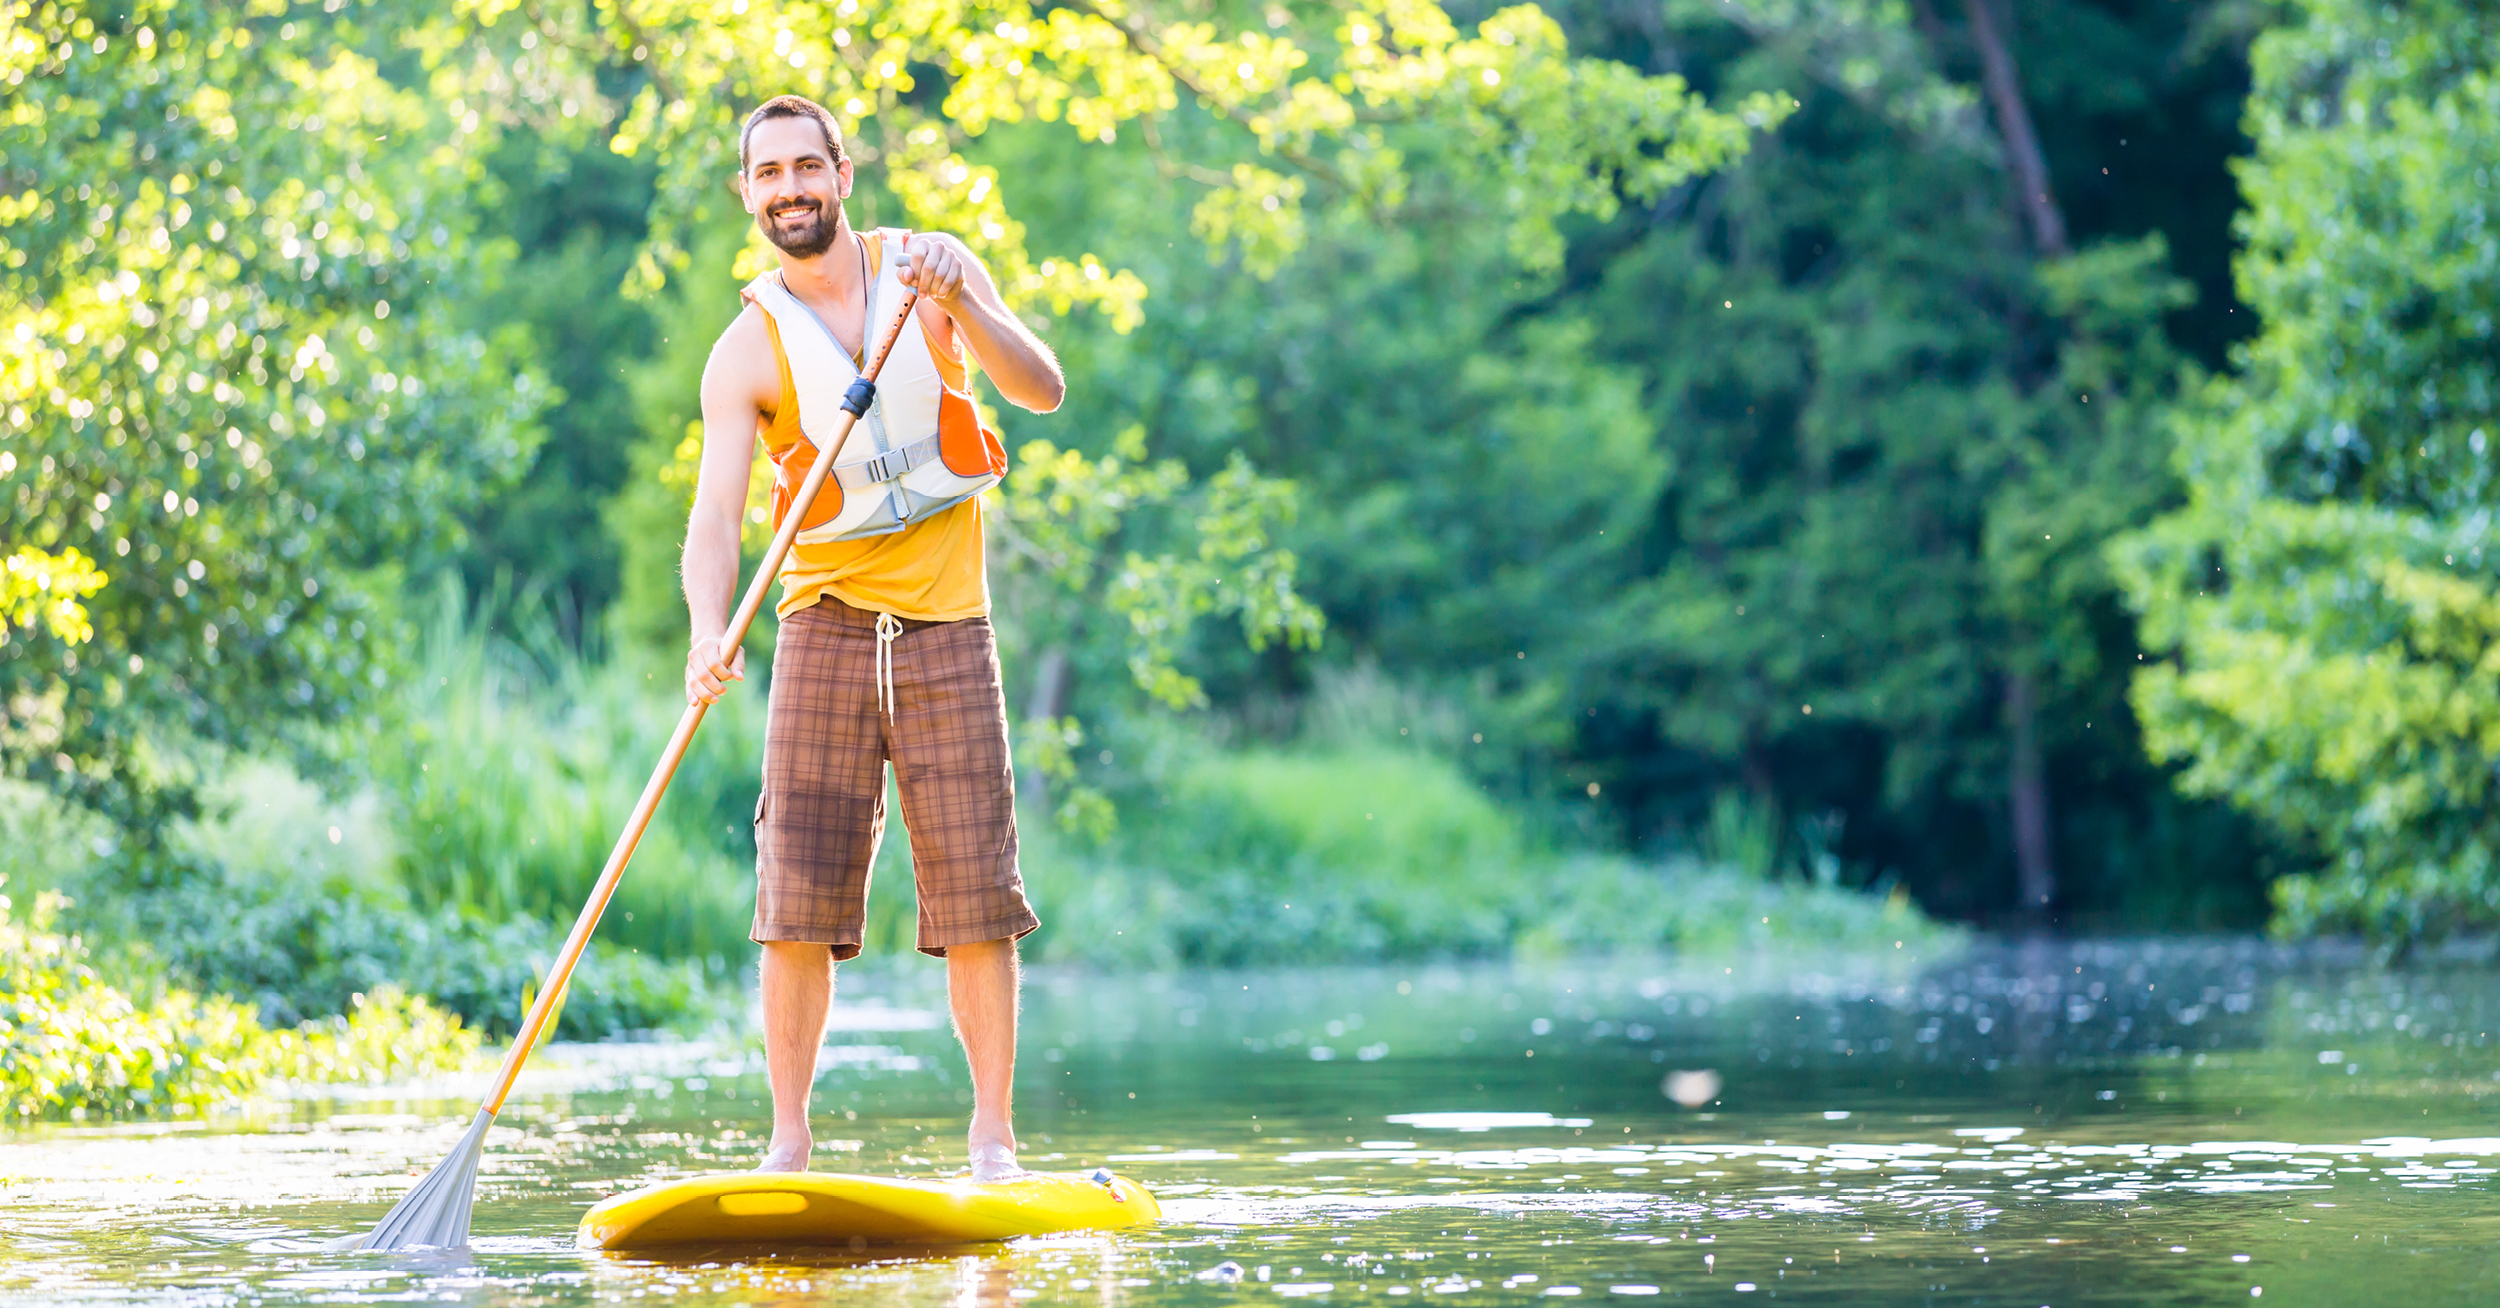 Stand Up Paddle boarders are becoming a familiar sight on our rivers and seas.